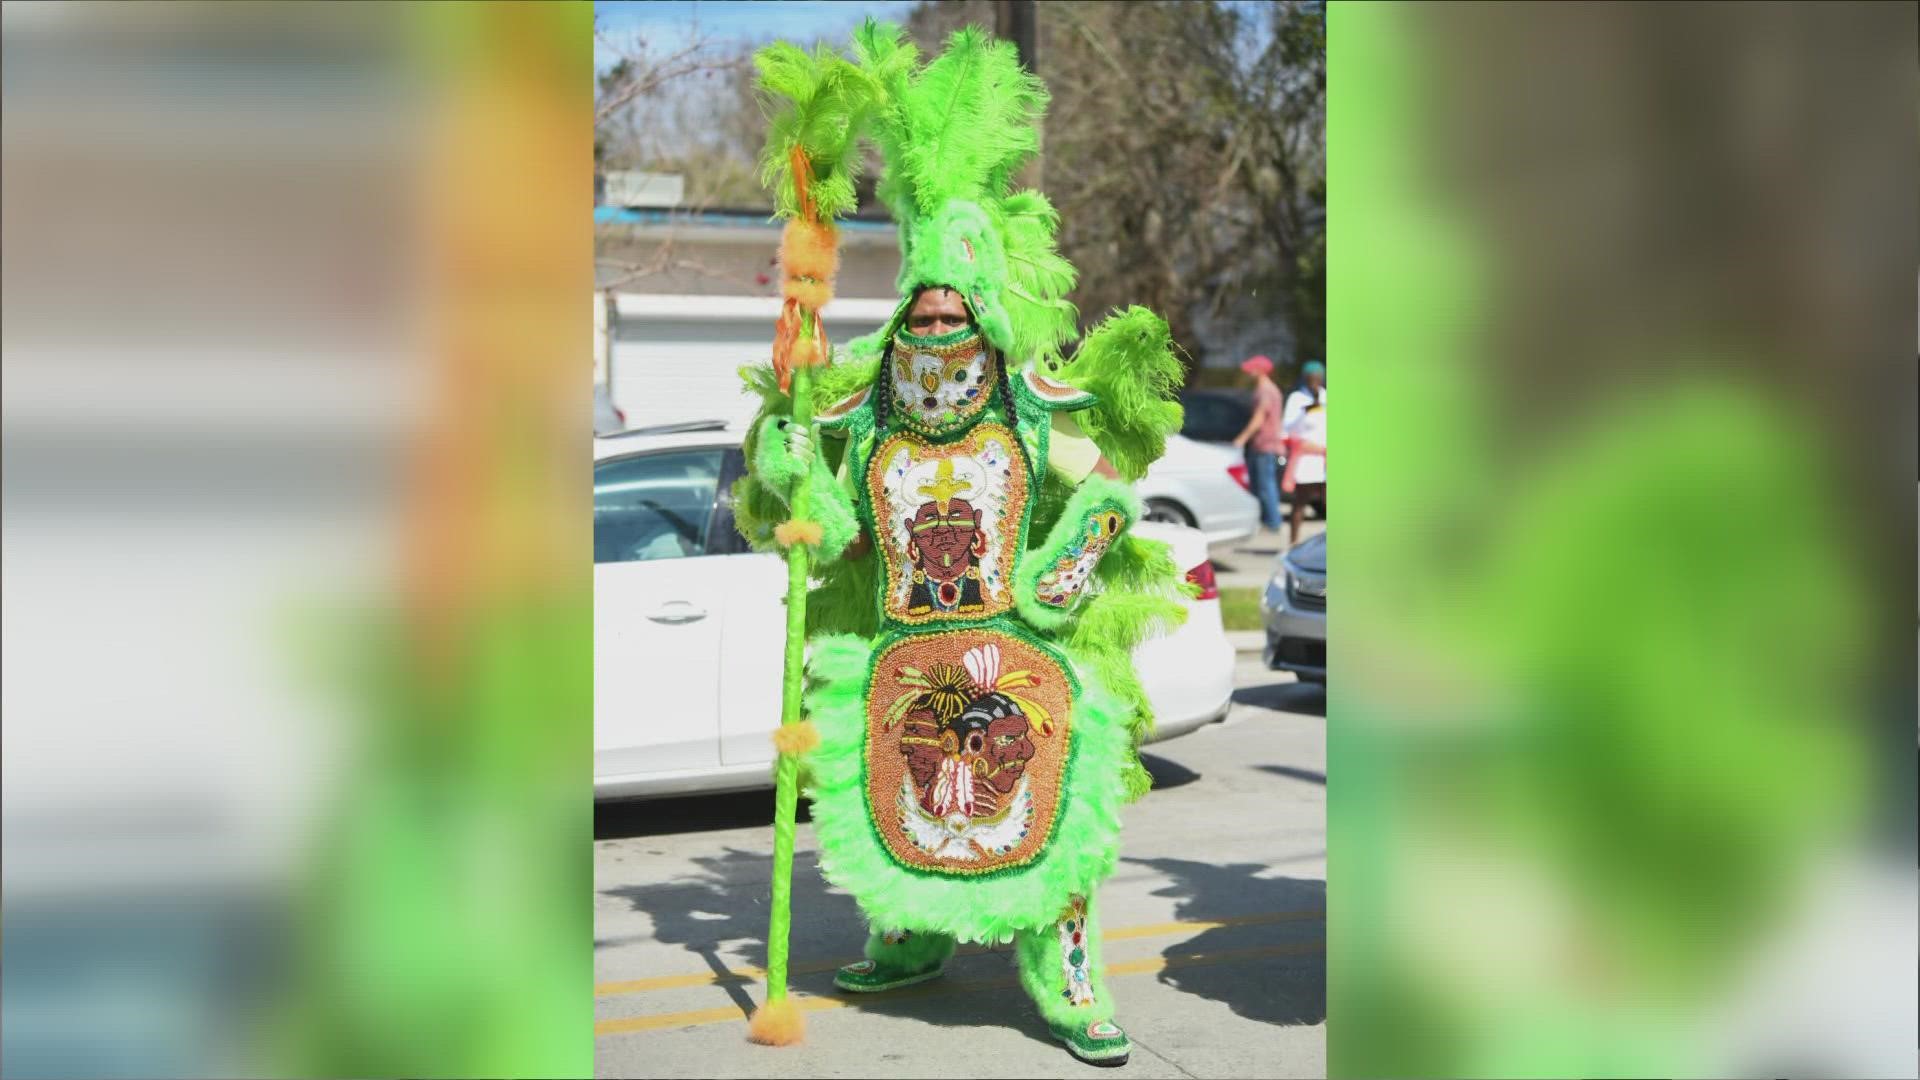 The victim, 19-year-old Geore Hankton, is the grandson of a New Orleans Mardi Gras Indian Big Chief.